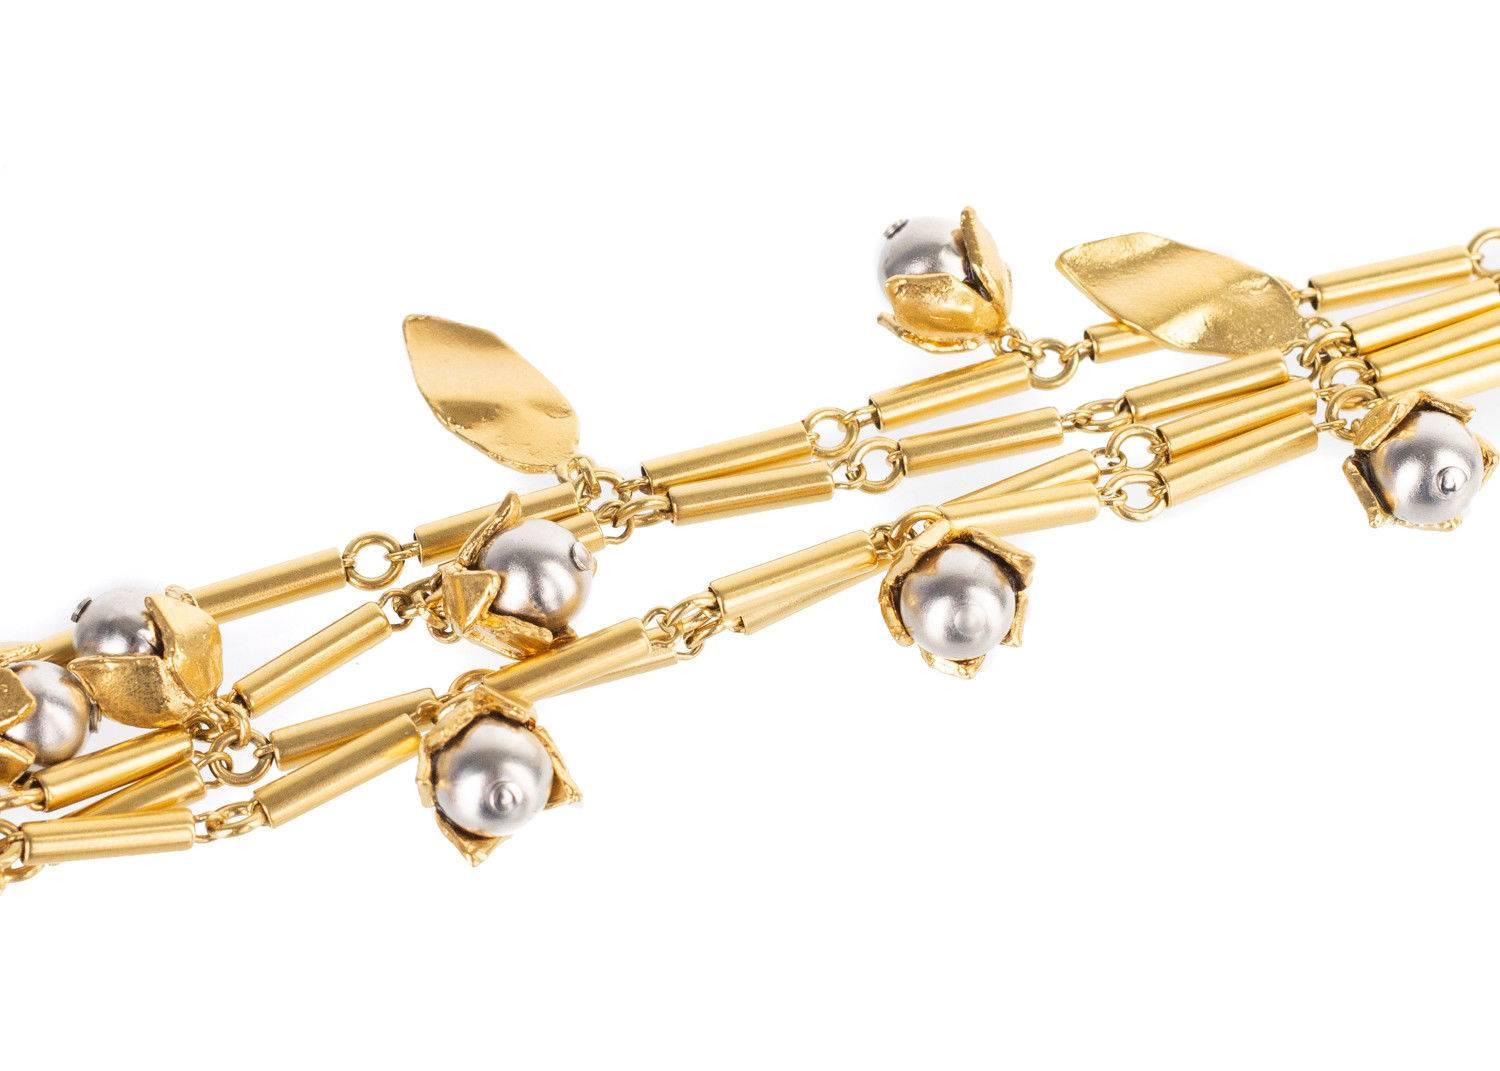 Start your spring off right with your Roberto Cavalli Bracelet. This rare piece features metal carved leaves, silver encased gold toned buds, and bar linked chains. You can slip this bracelet on with a shift dress and gold heels for the perfect